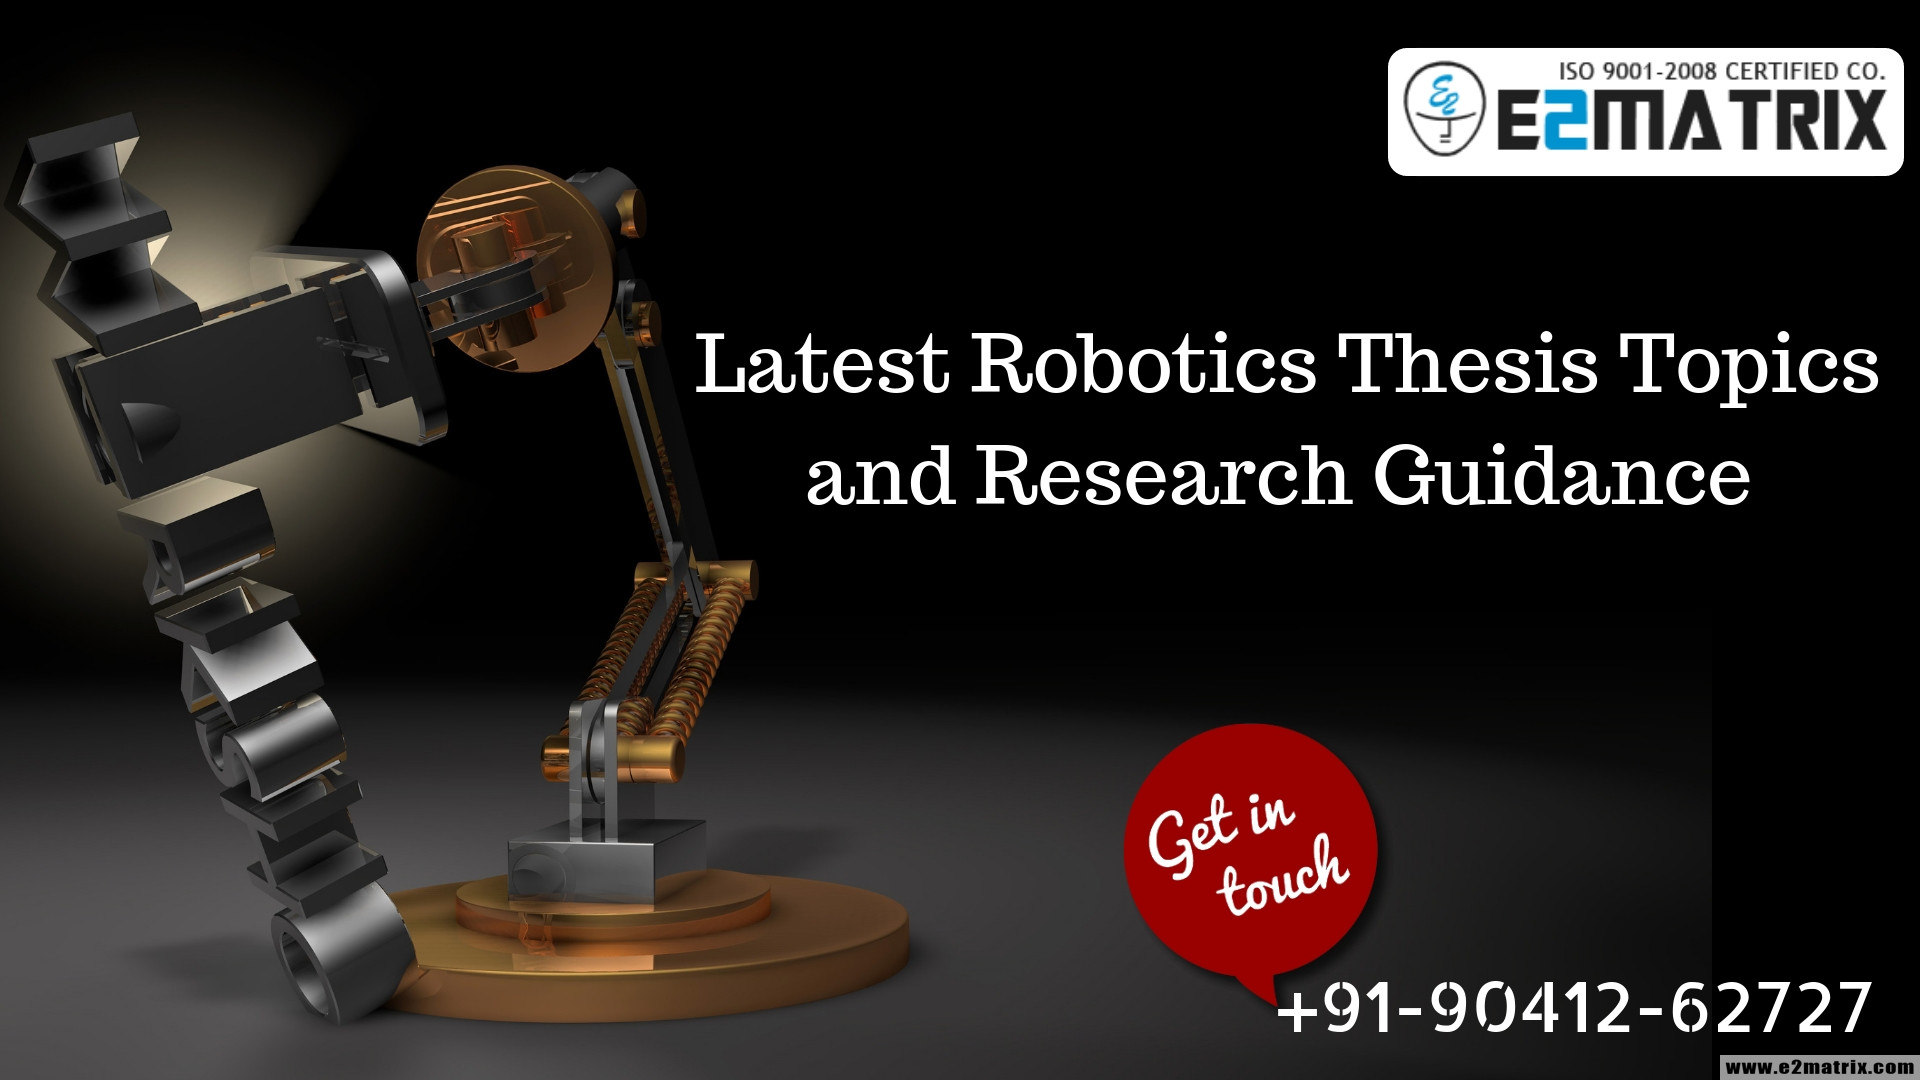 Latest Robotics Thesis topics help and Research Guidance